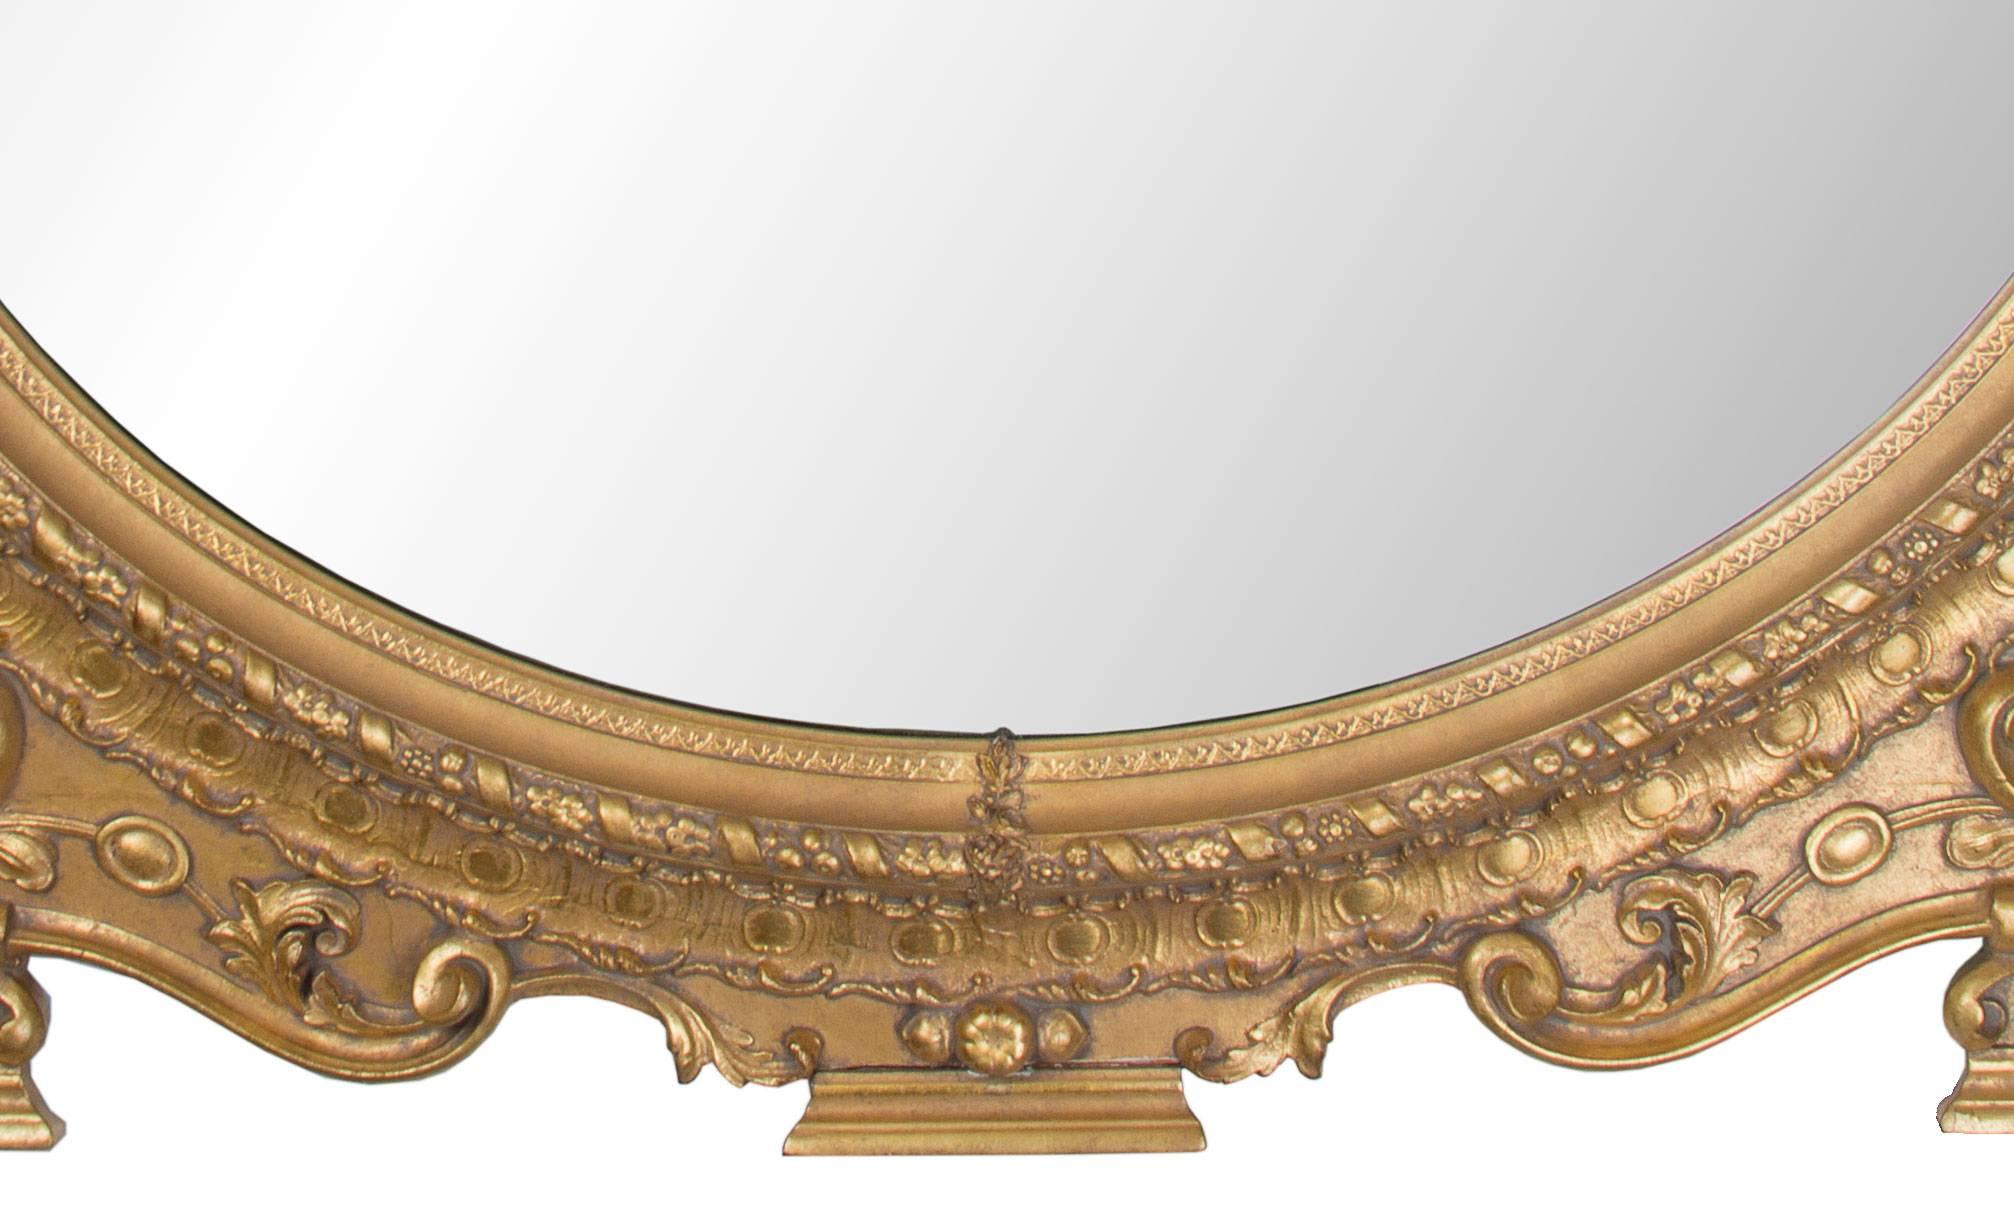 19th century carved giltwood and composition overmantle mirror. Imposing central crest with foliate and scrolled decoration over the oval mirror plate framed with egg and dart decoration and floral rope design. The over-all mirror rests on three